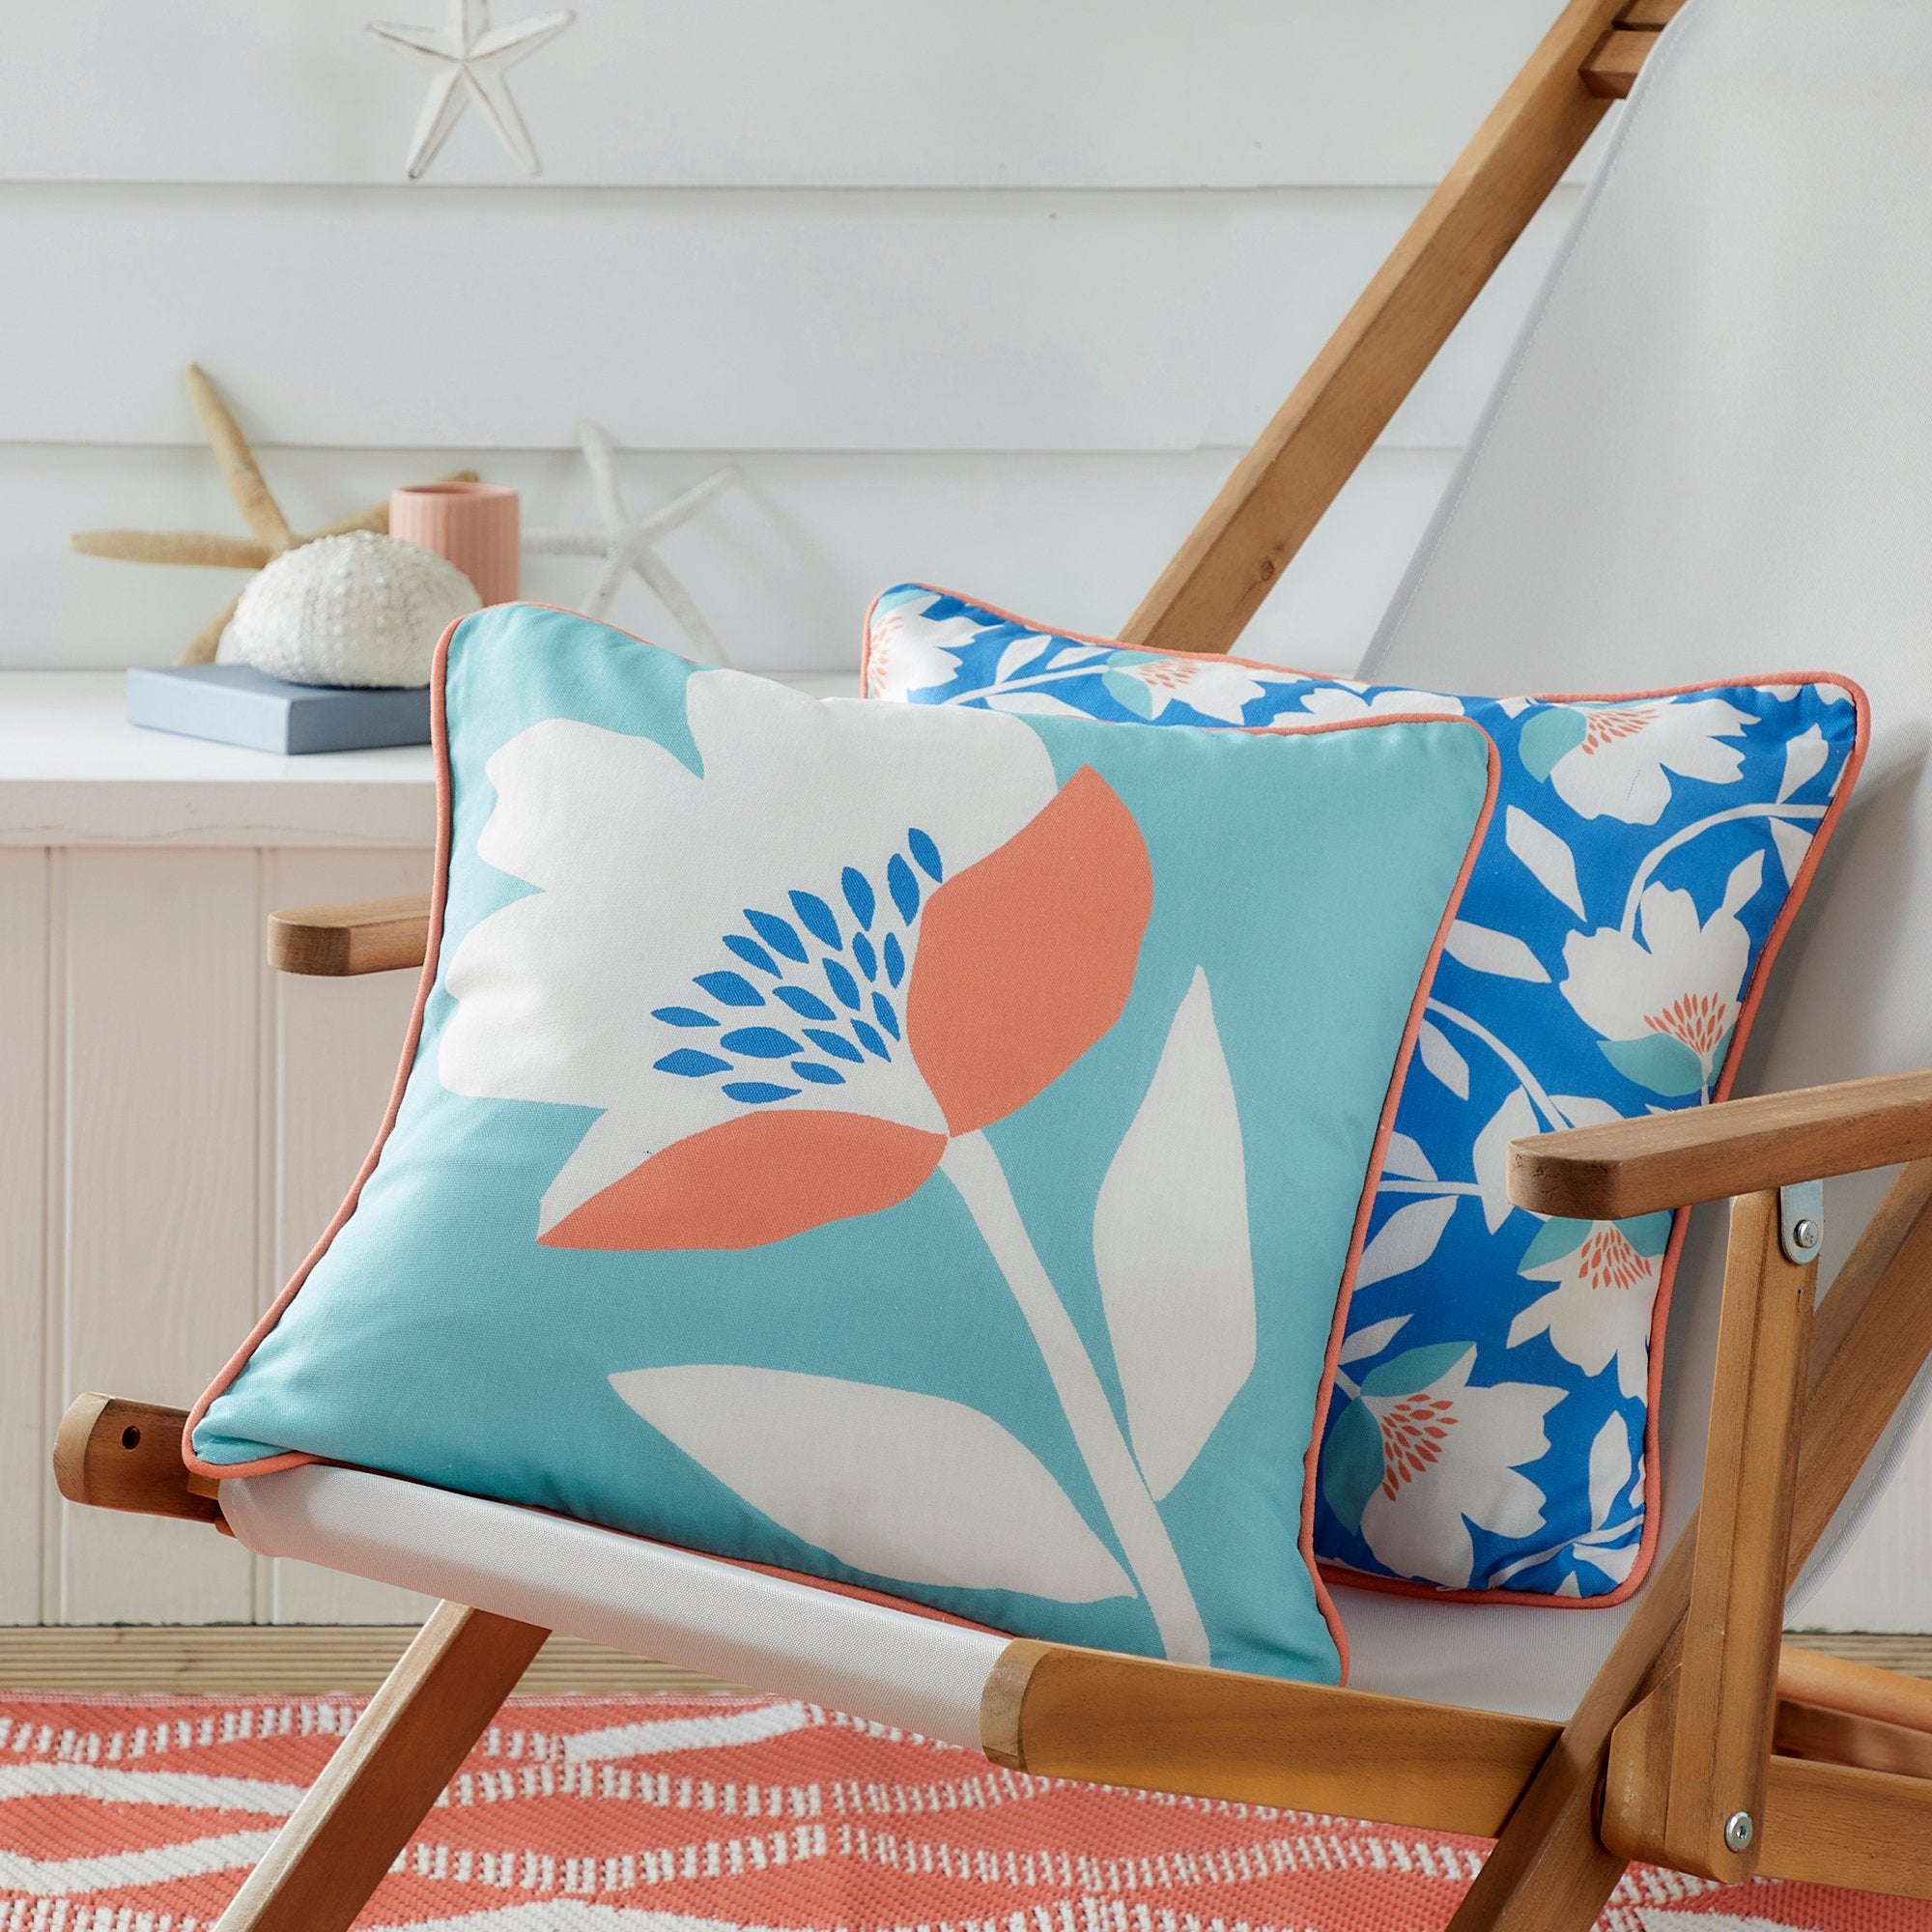 Cushion Luna Outdoor by Fusion in Duck Egg